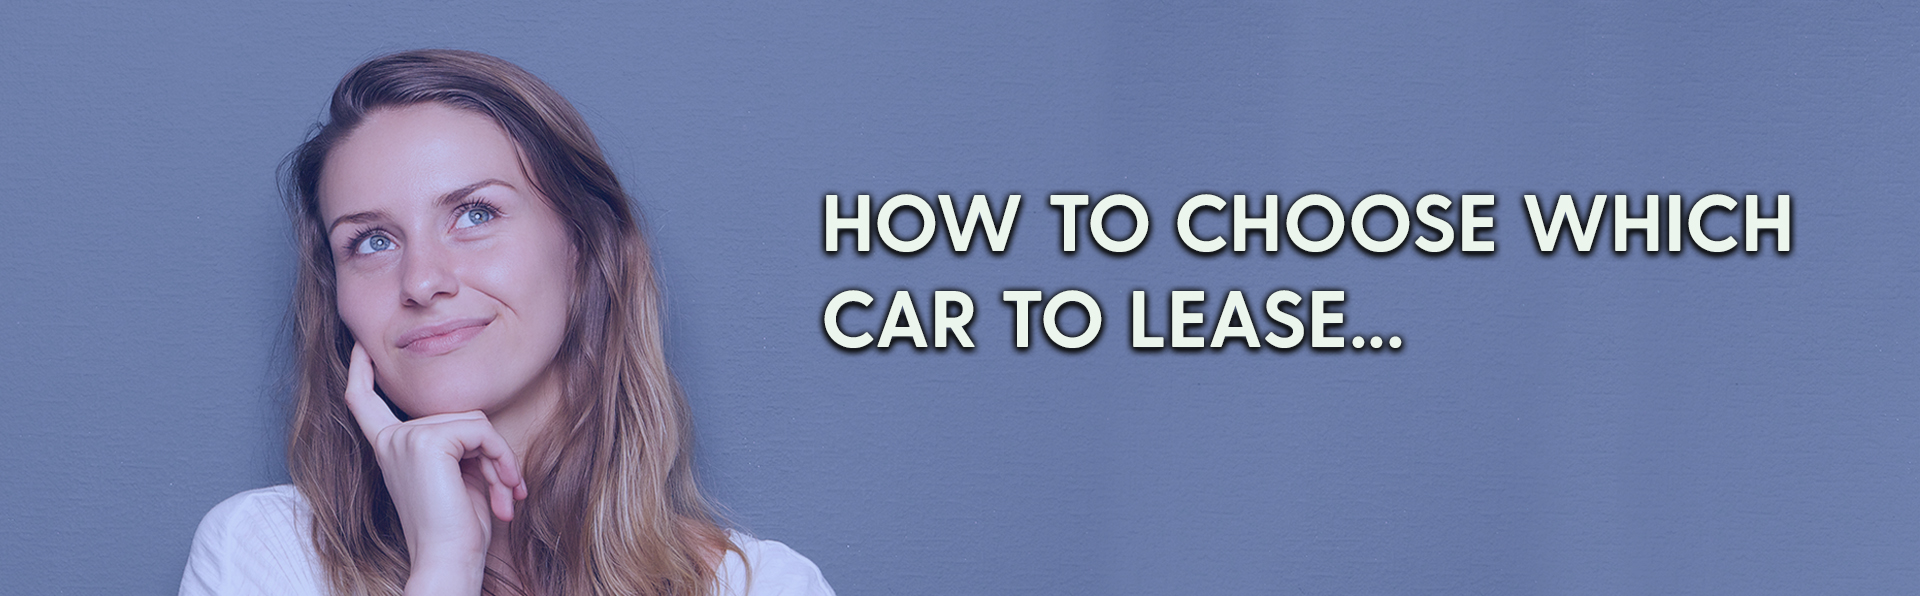 How To Choose Which Car To Lease